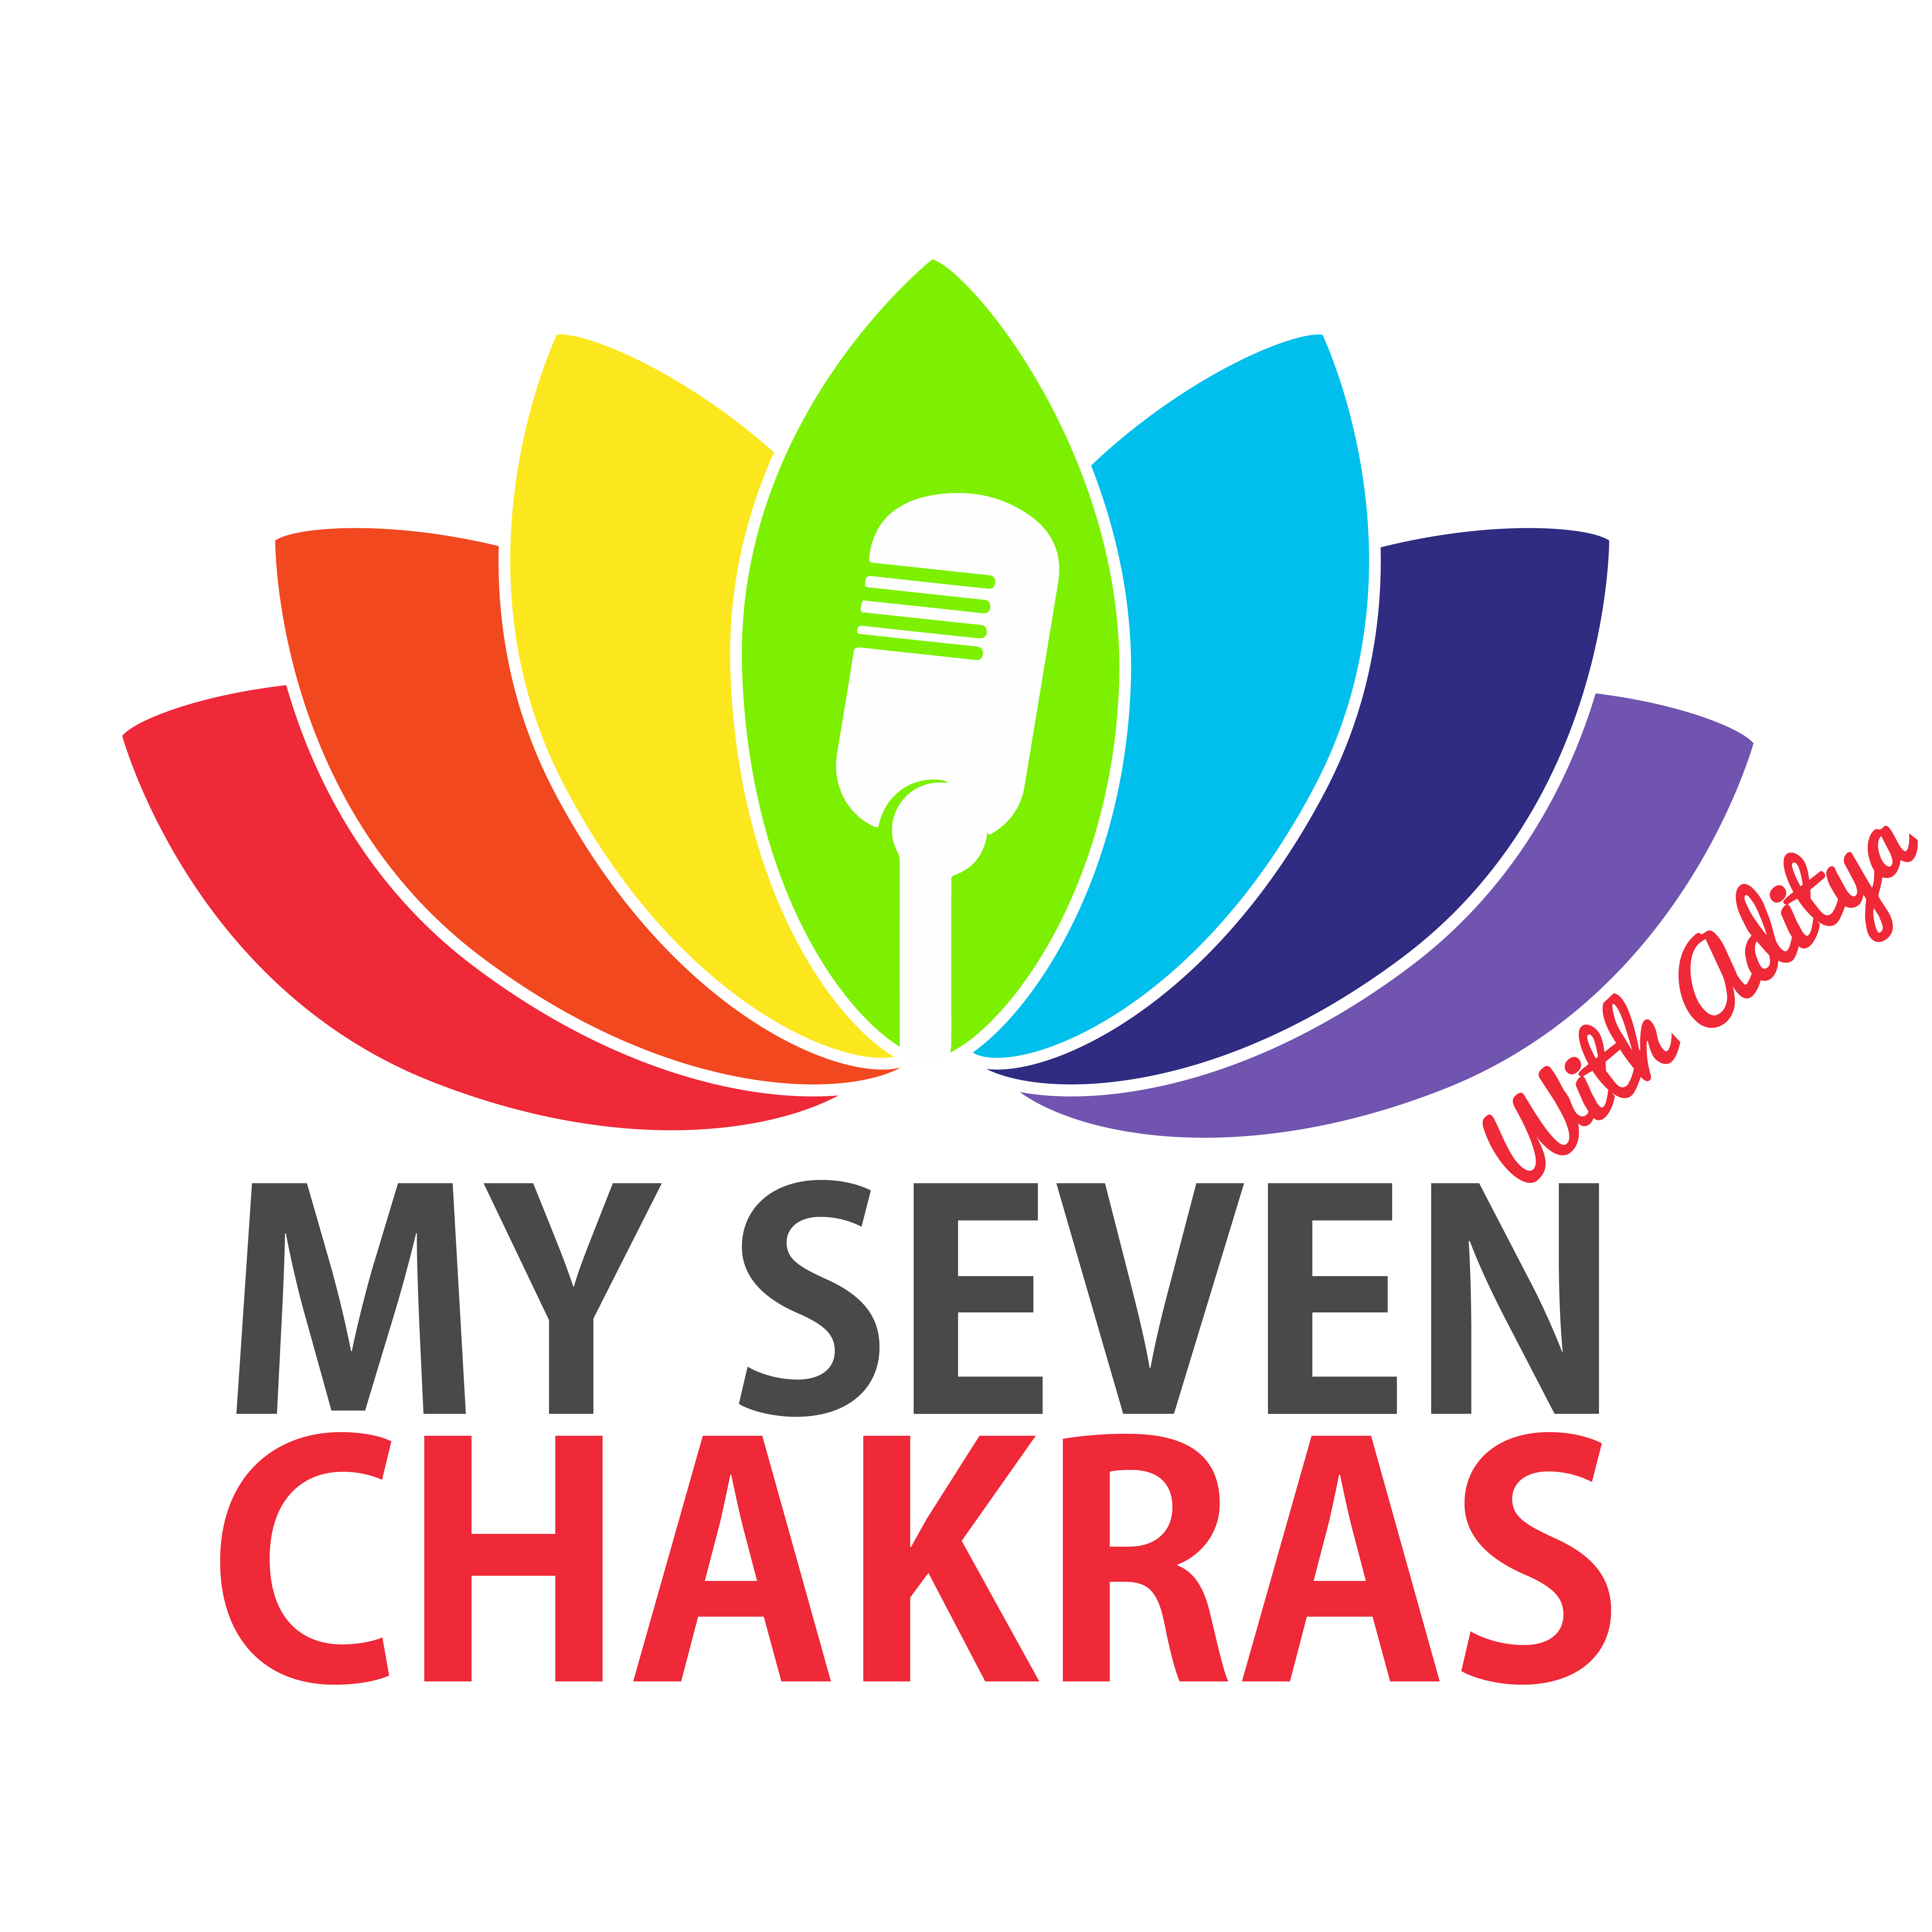 How I Awakened My 7 Chakras And The 4 Areas Of My Life That Changed!